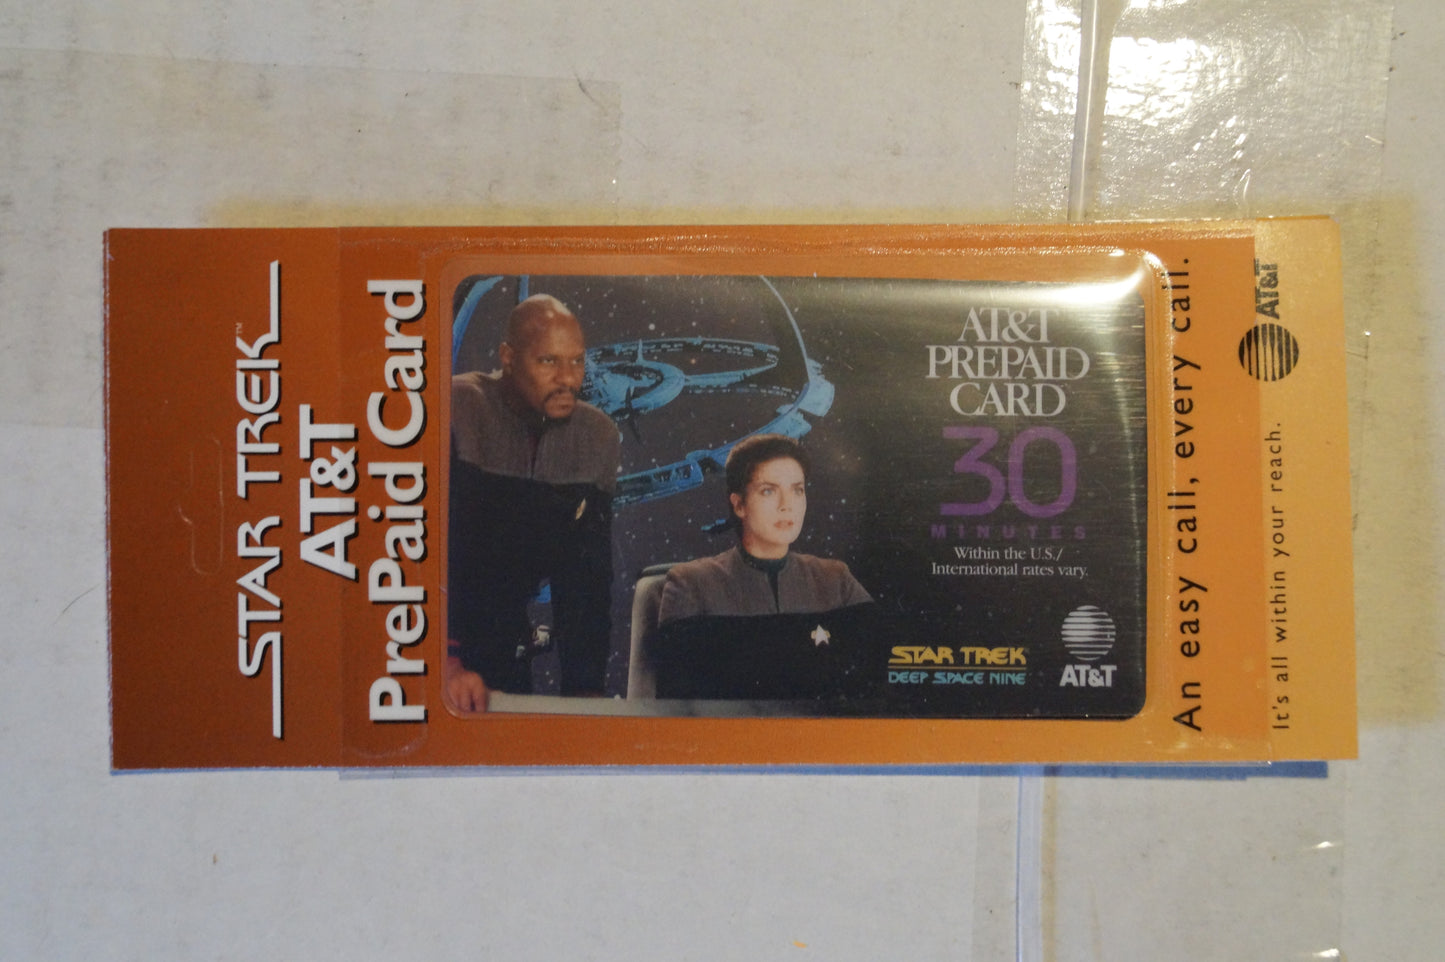 Star Trek AT&T Collectible phone card from Deep Space Nine